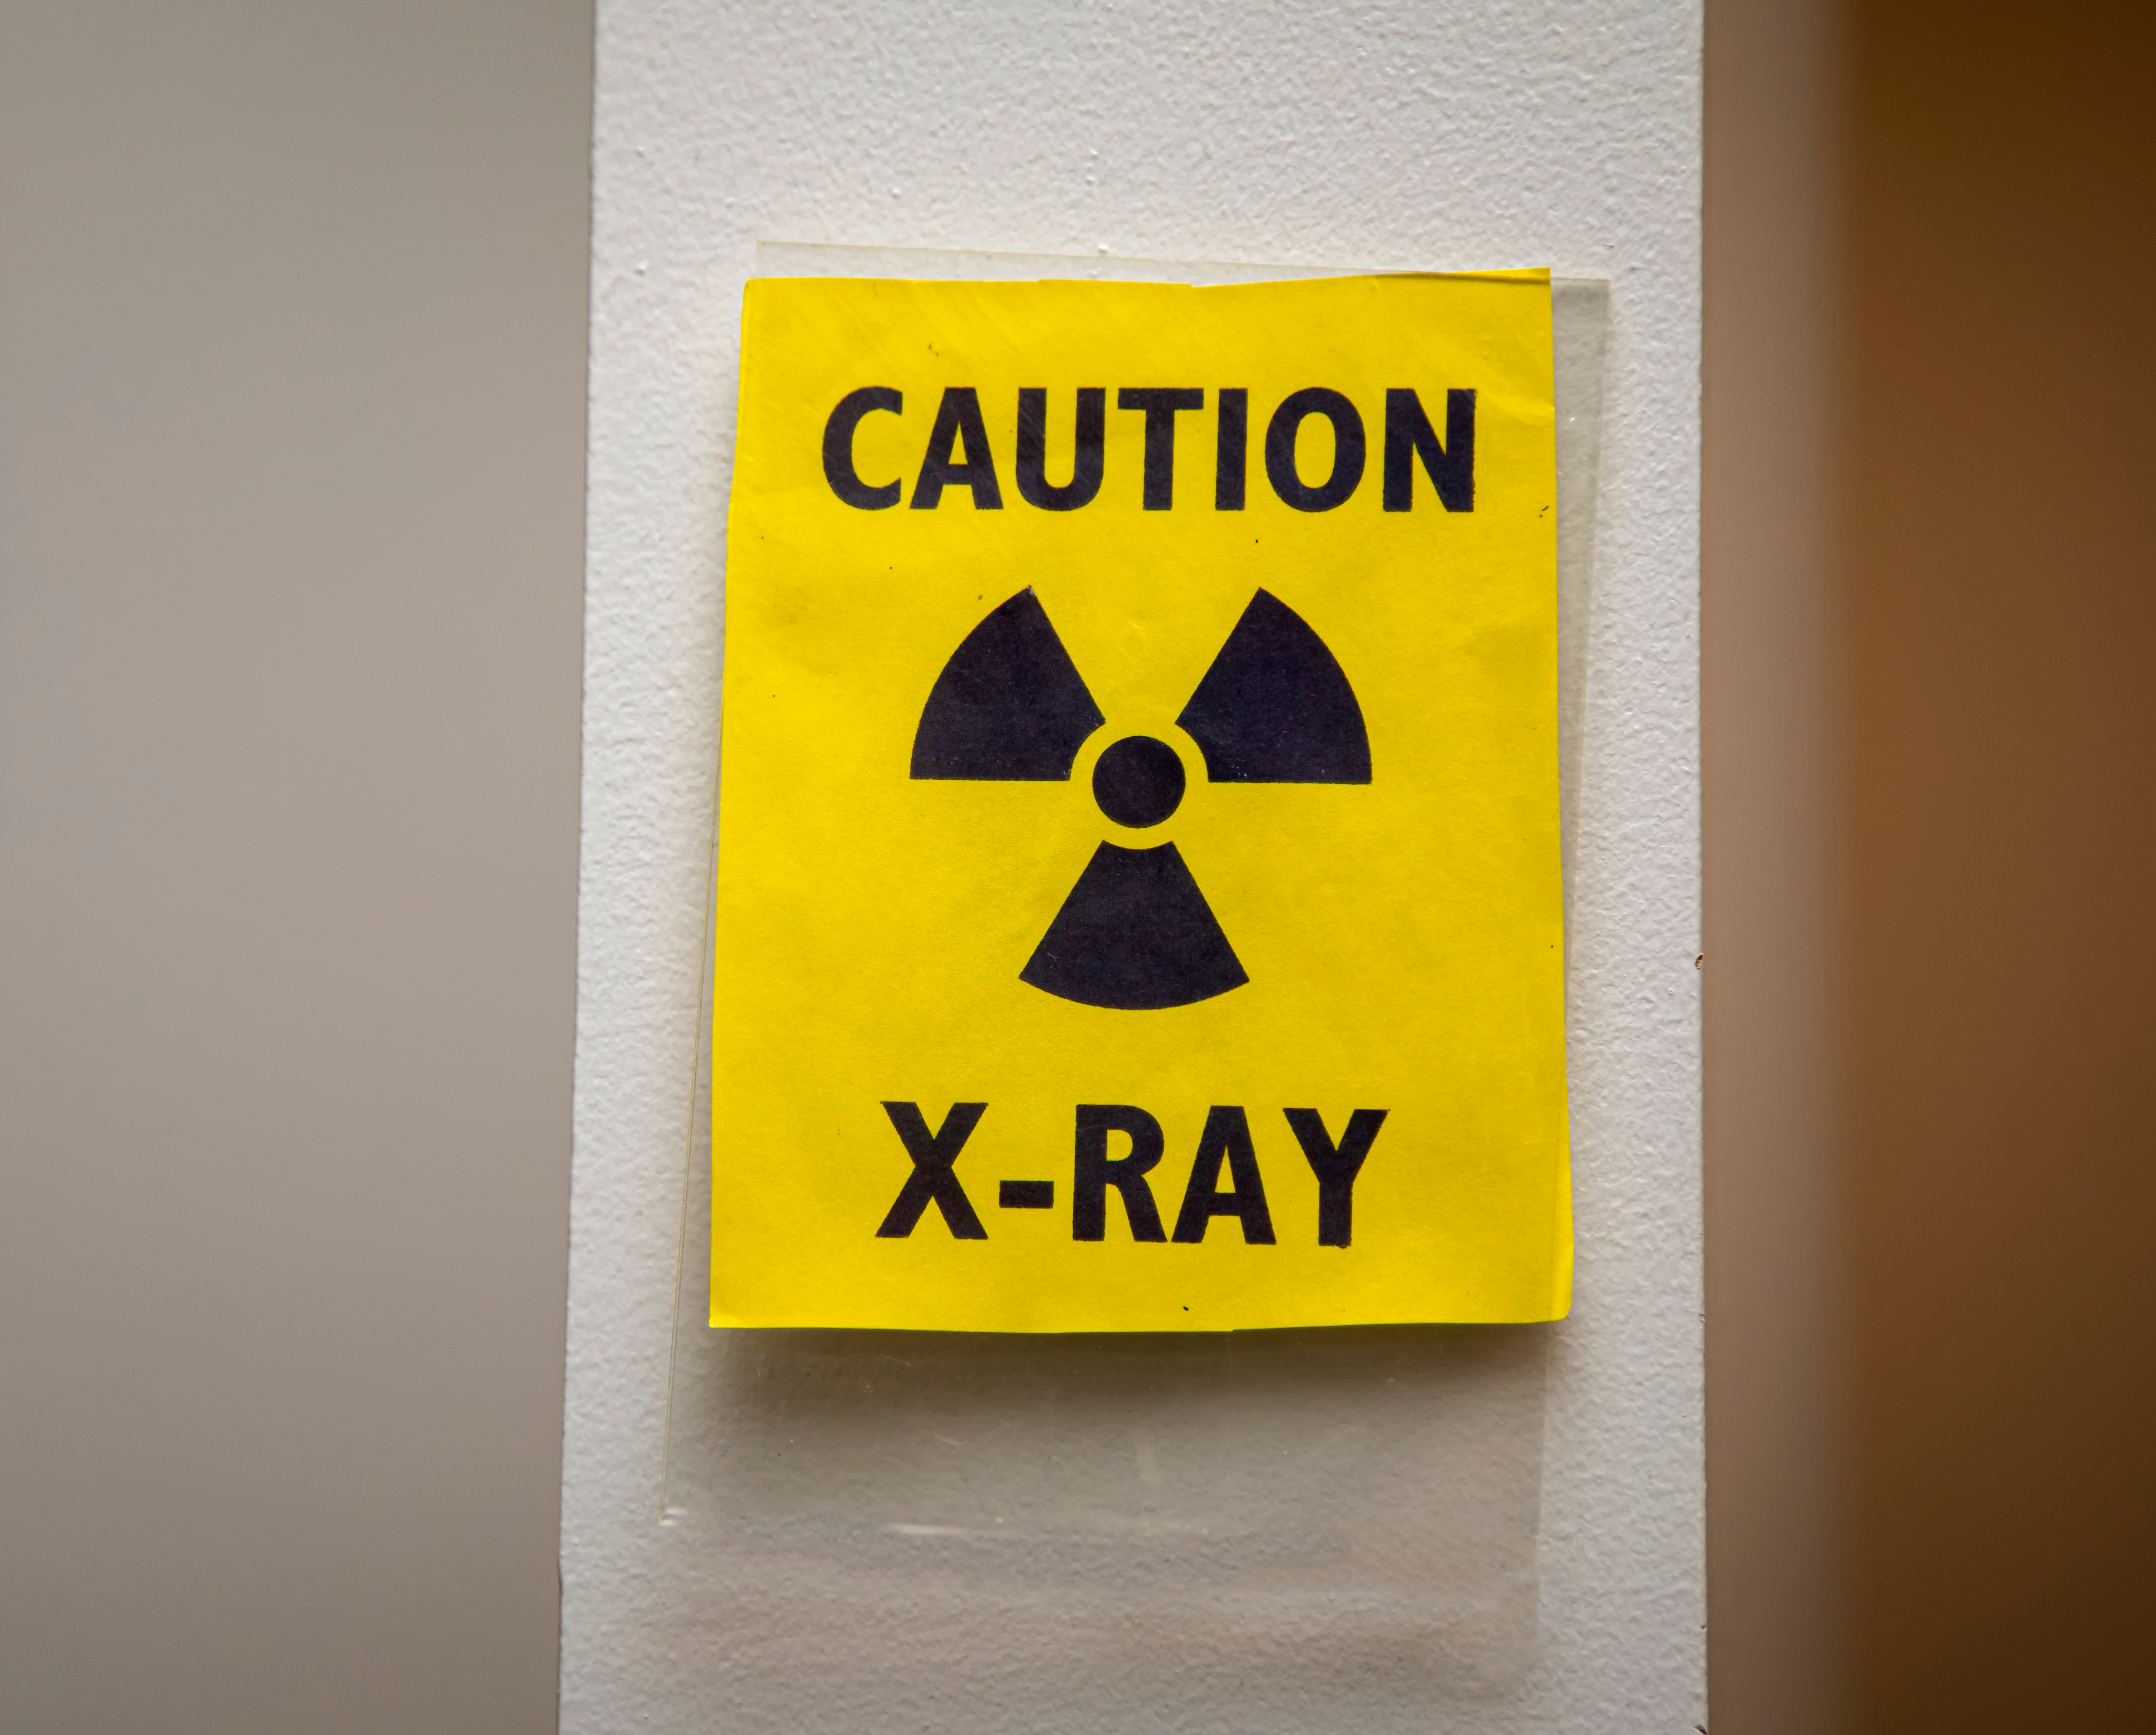 Example of x-ray caution signage